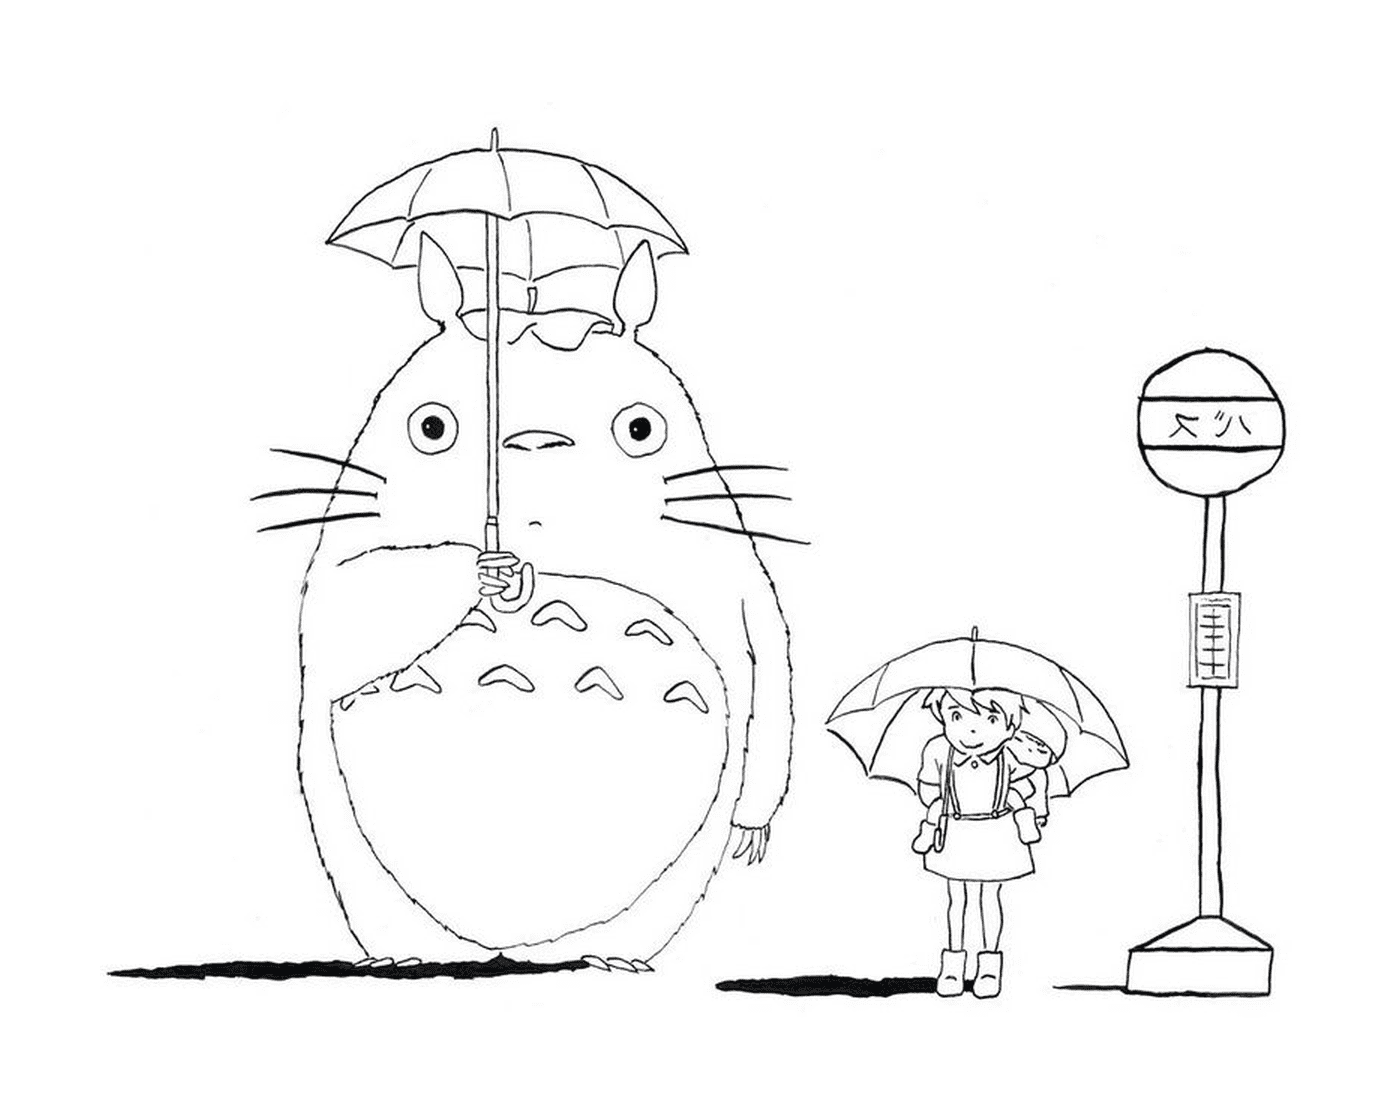  Totoro and a girl waiting for the bus in the rain 